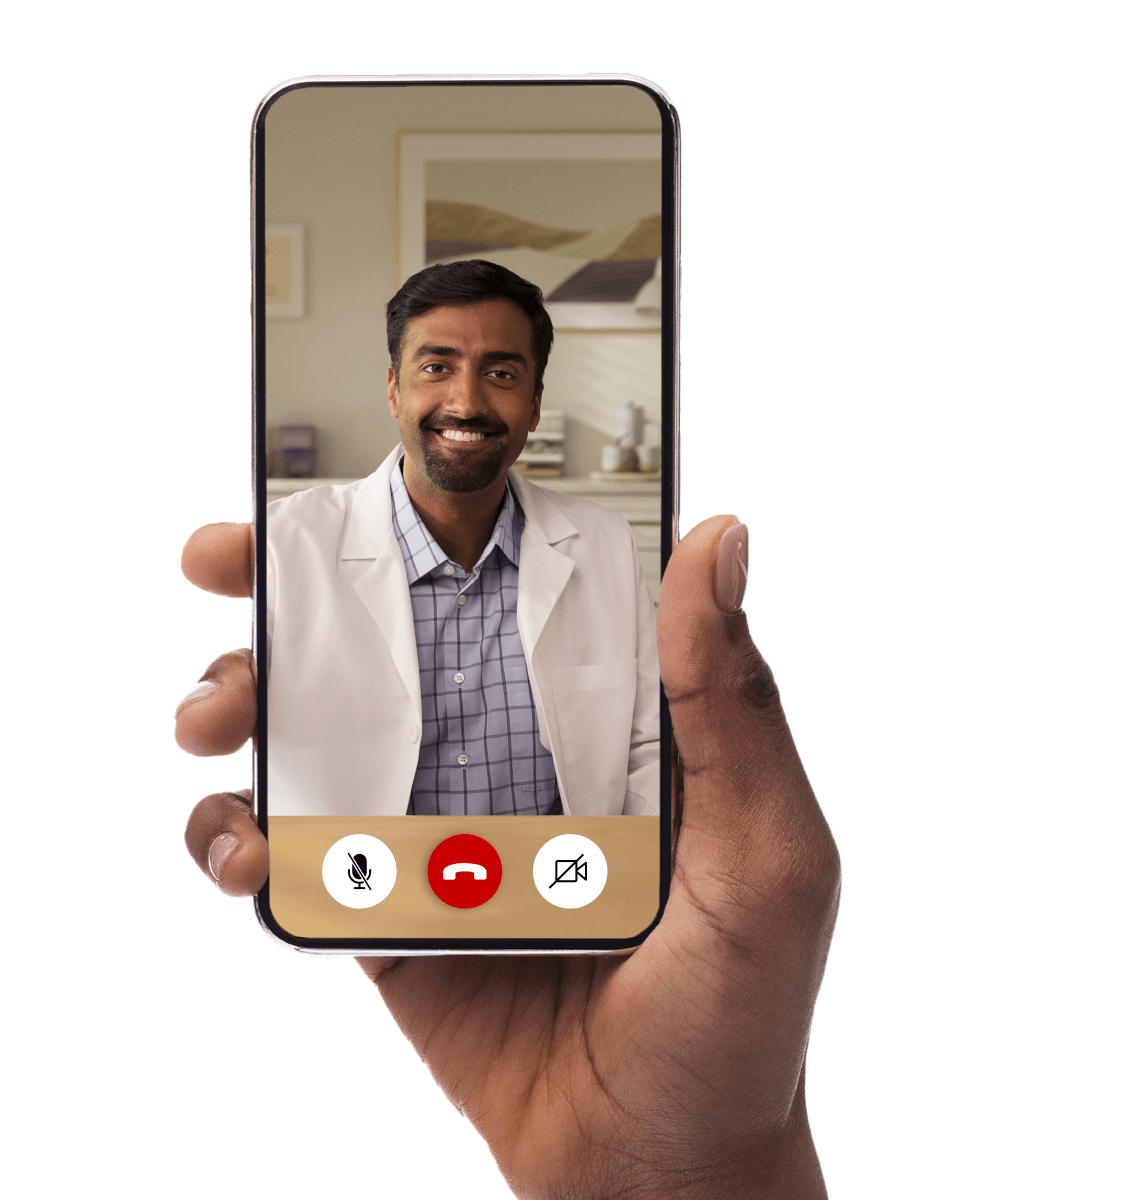 Video chat screen, with doctor